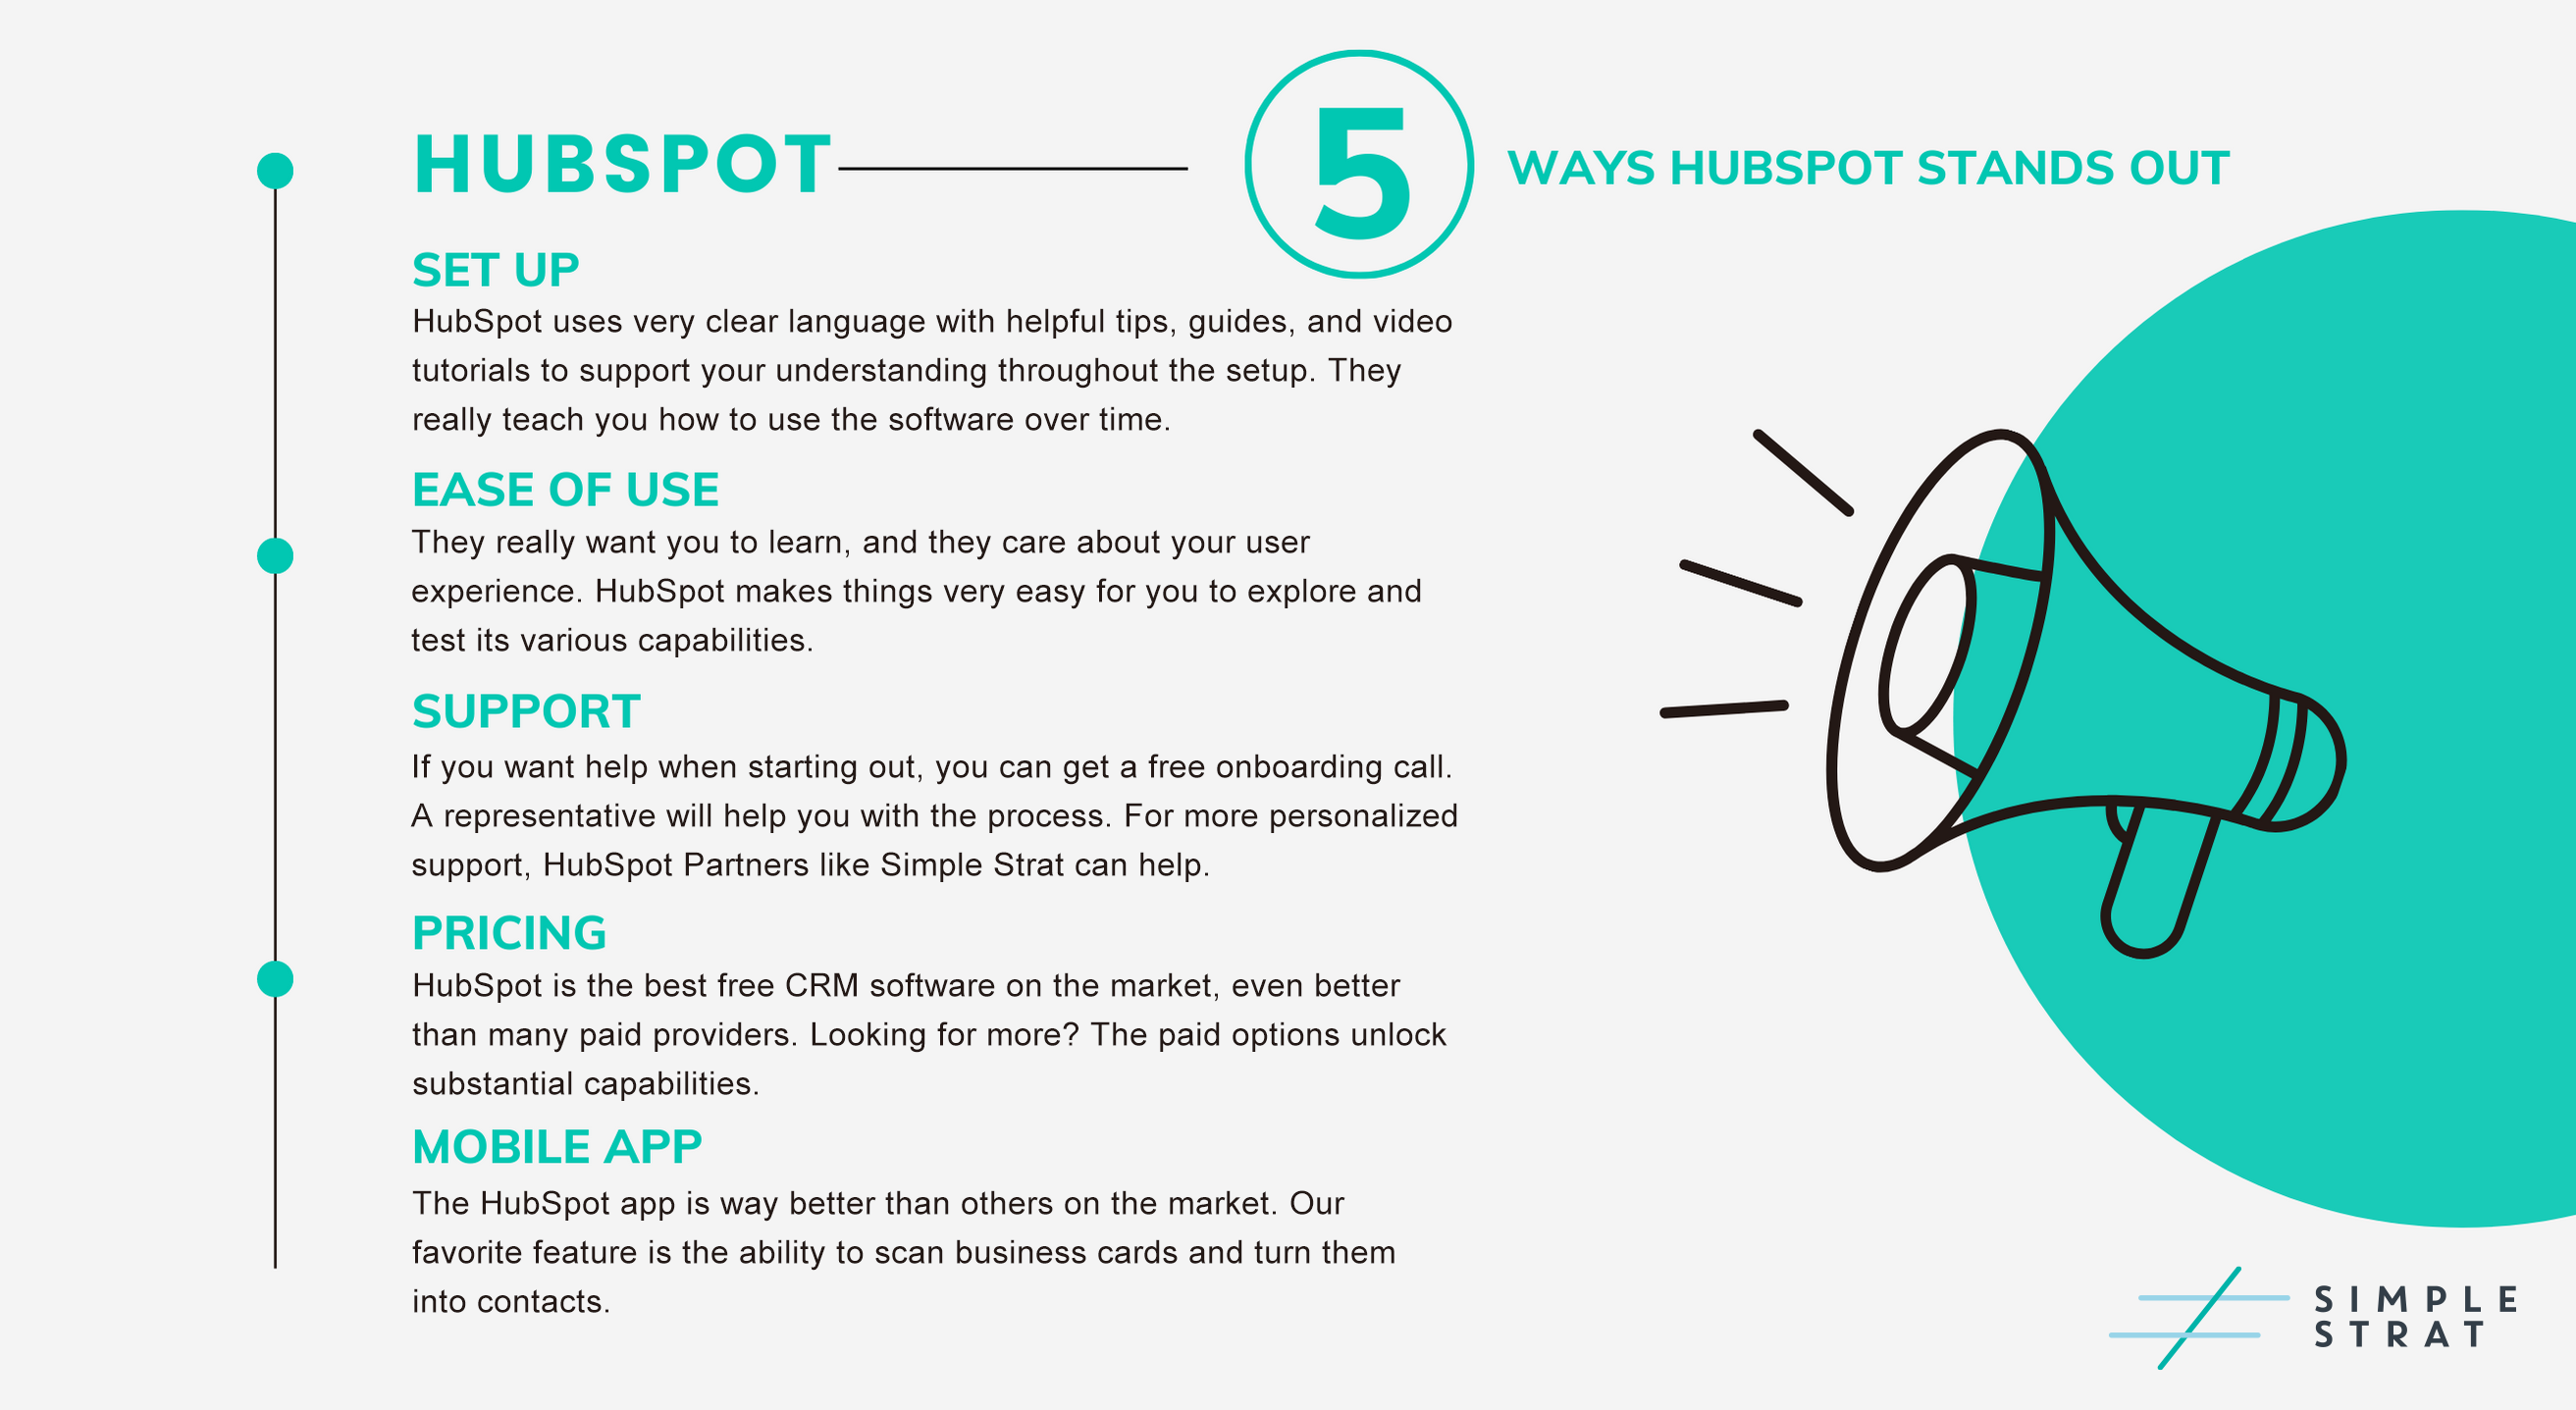 reasons HubSpot stands out - setup, ease of use, support, pricing, mobile app